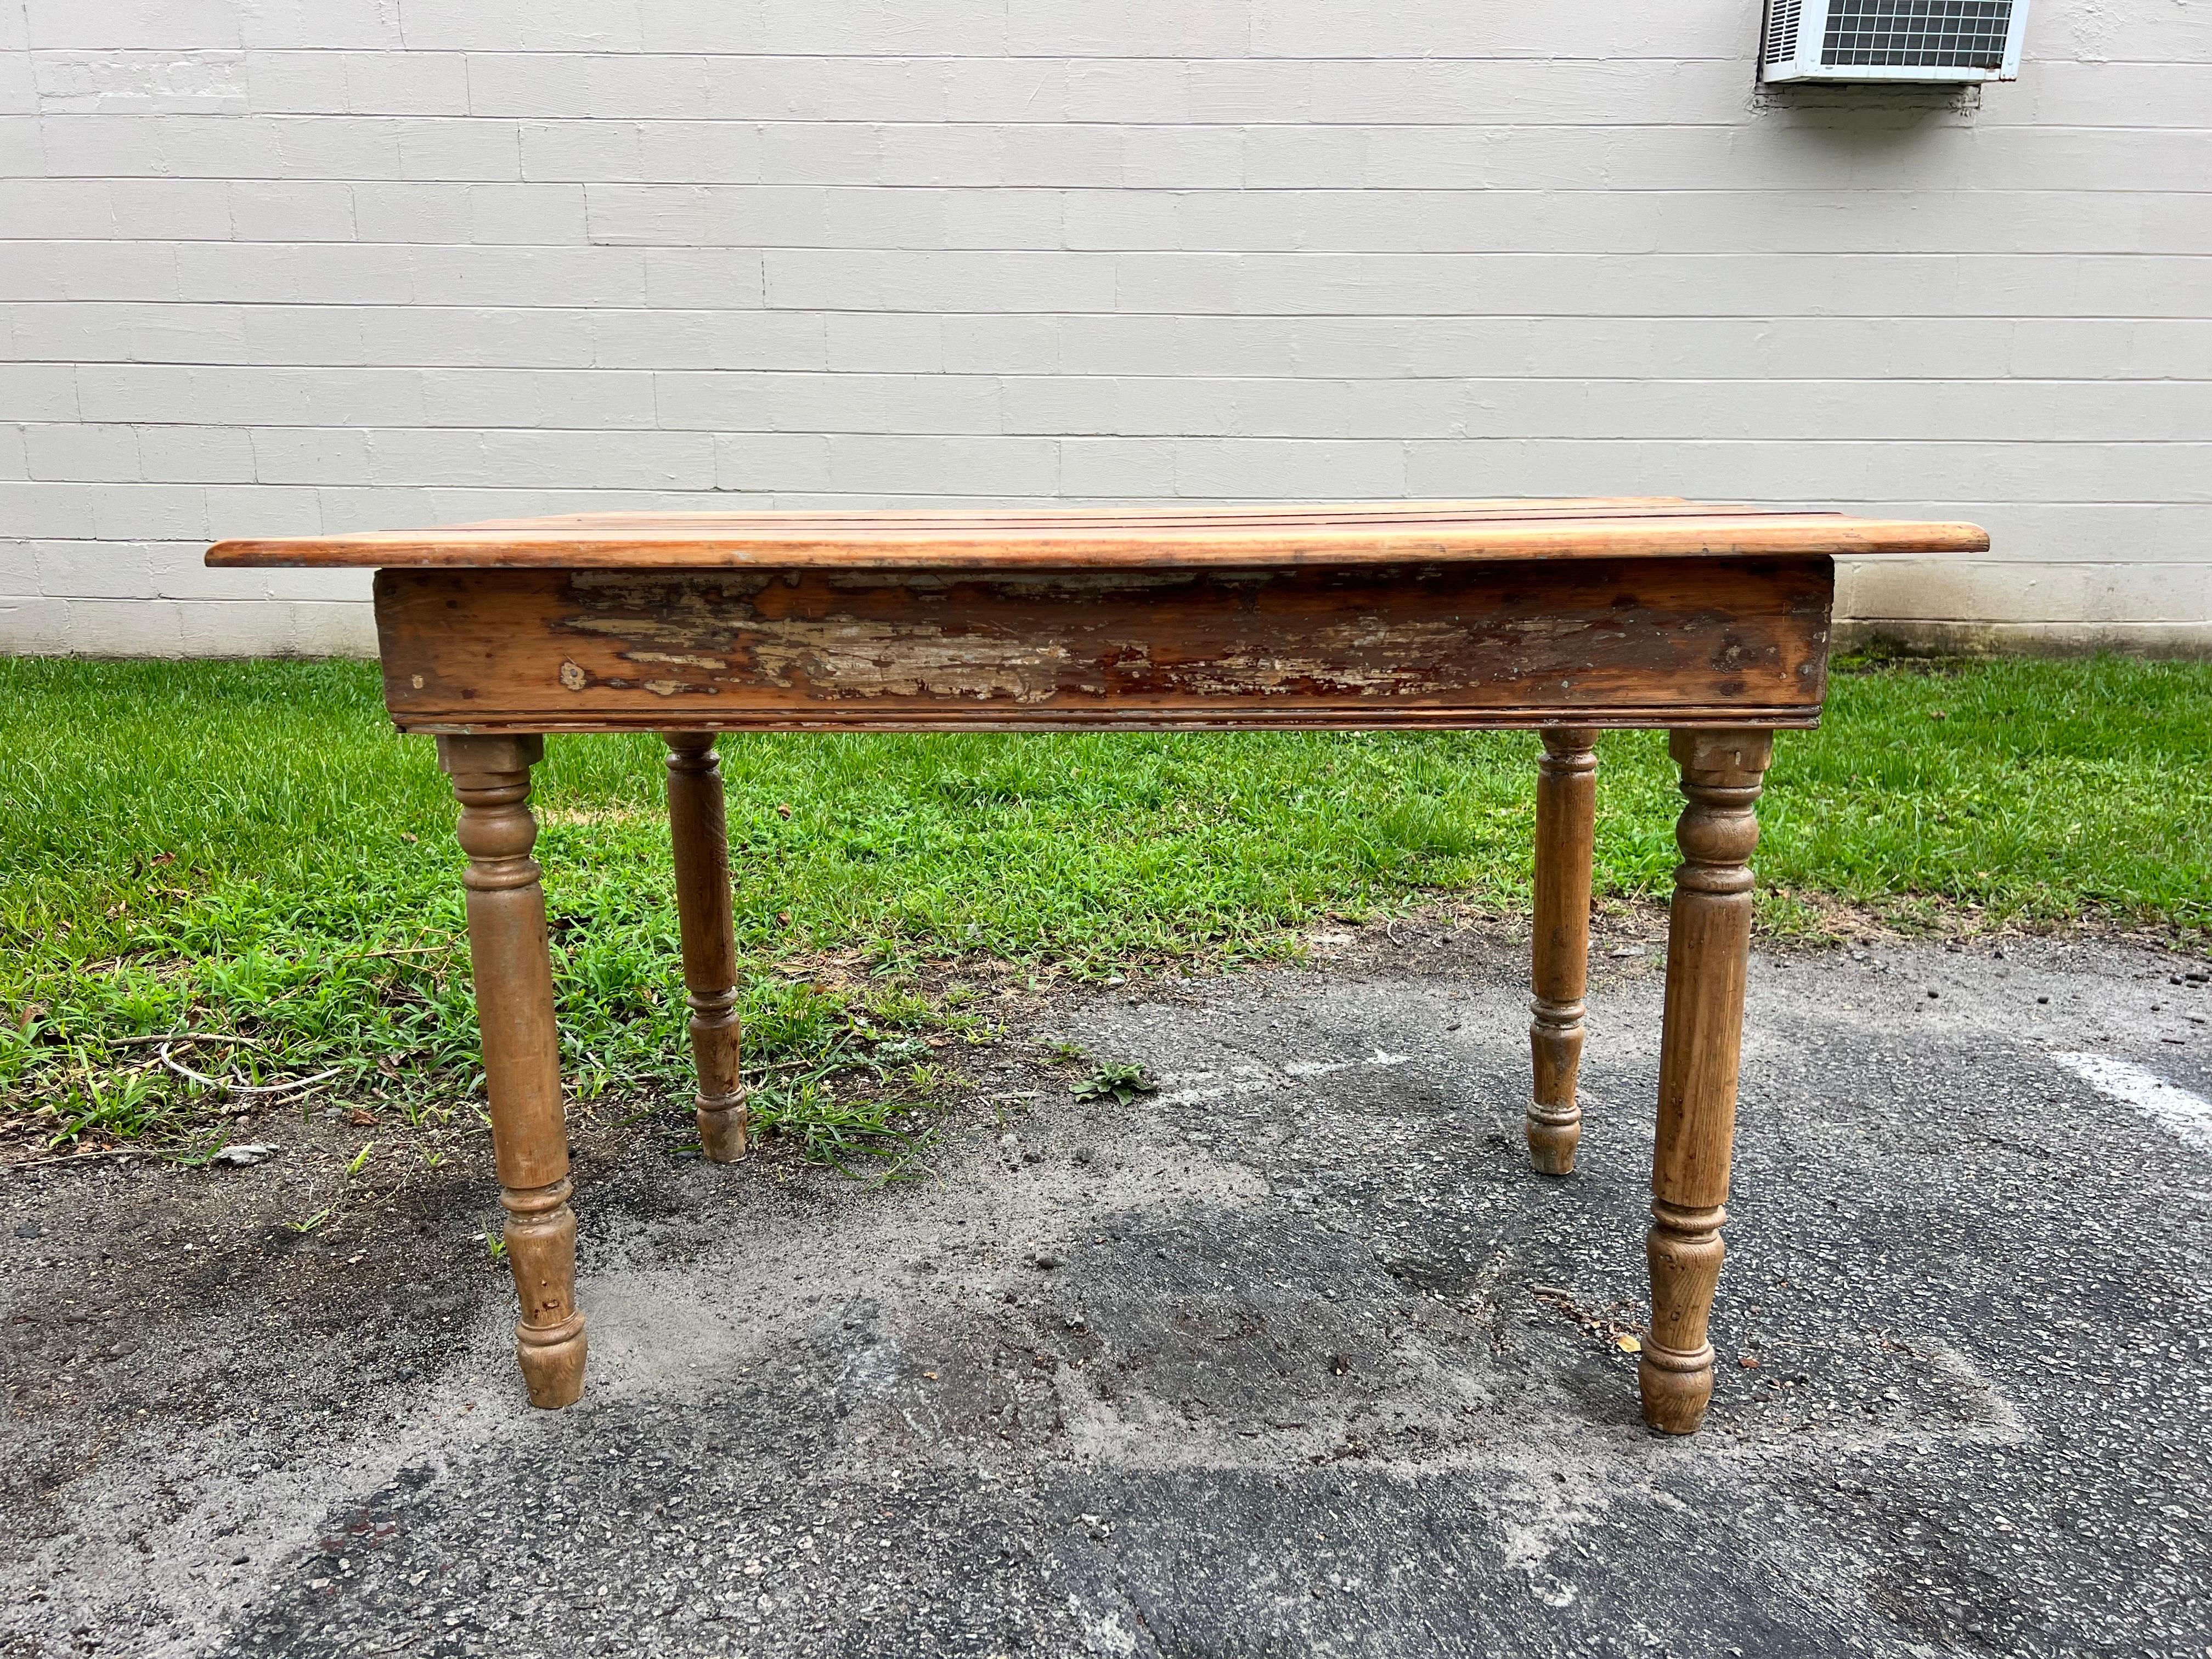 Late 19th Century American 3 plank top pine farmhouse table.   With turned legs and excellent patina, this table is very well constructed.   Great kitchen table or could be used as a console table, sofa table, desk…very versatile.